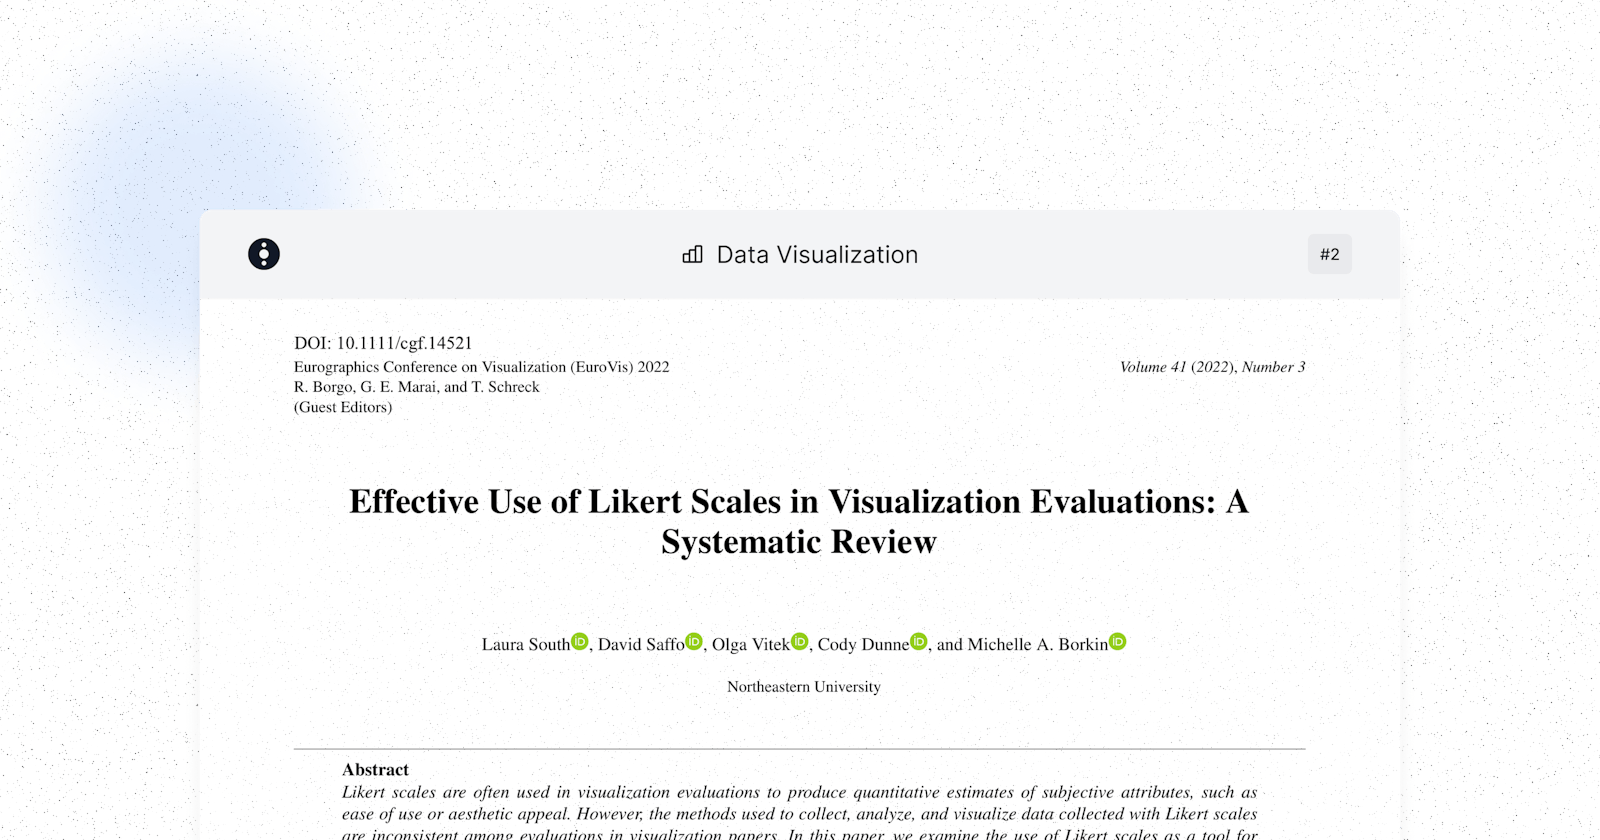 Effective Use of Likert Scales in Visualization Evaluations: A Systematic Review